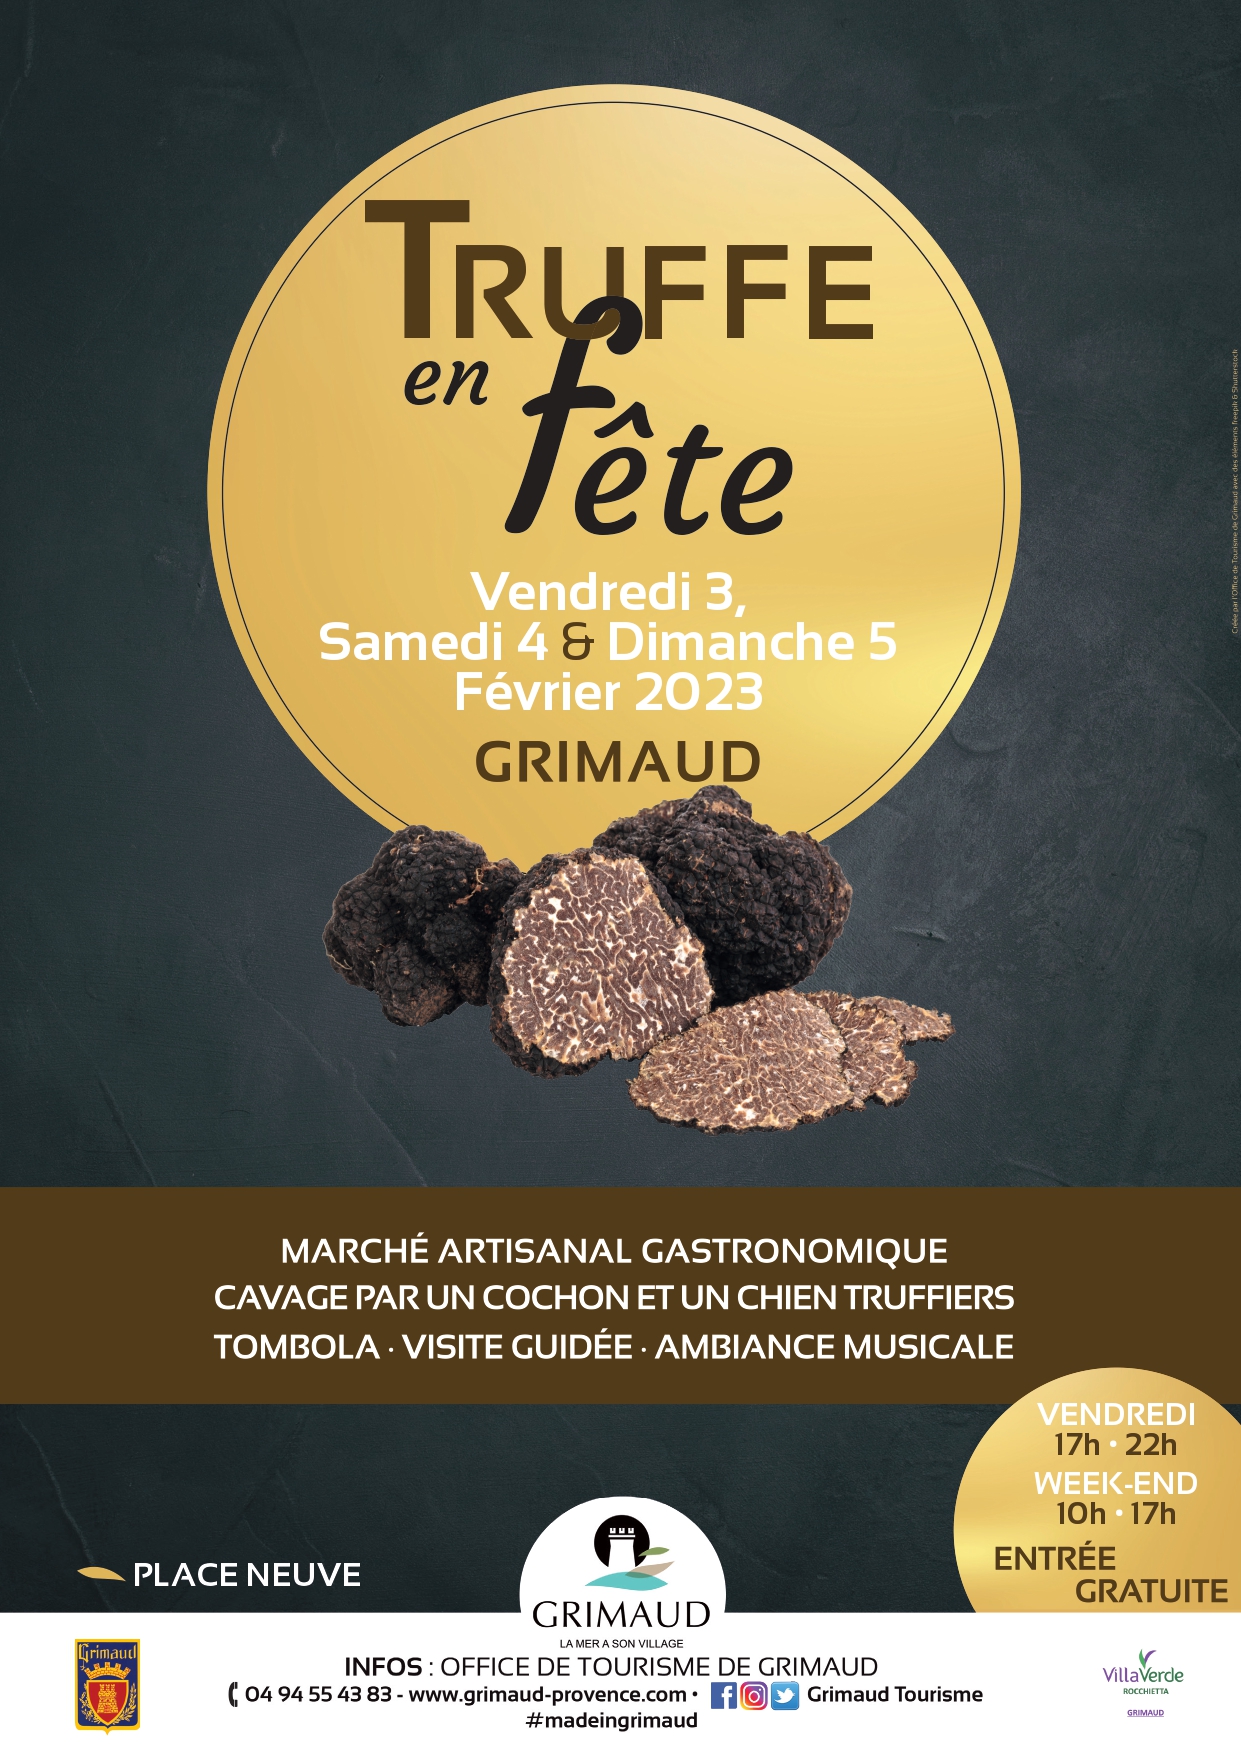 From 03 to 05 February 2023: Truffle party